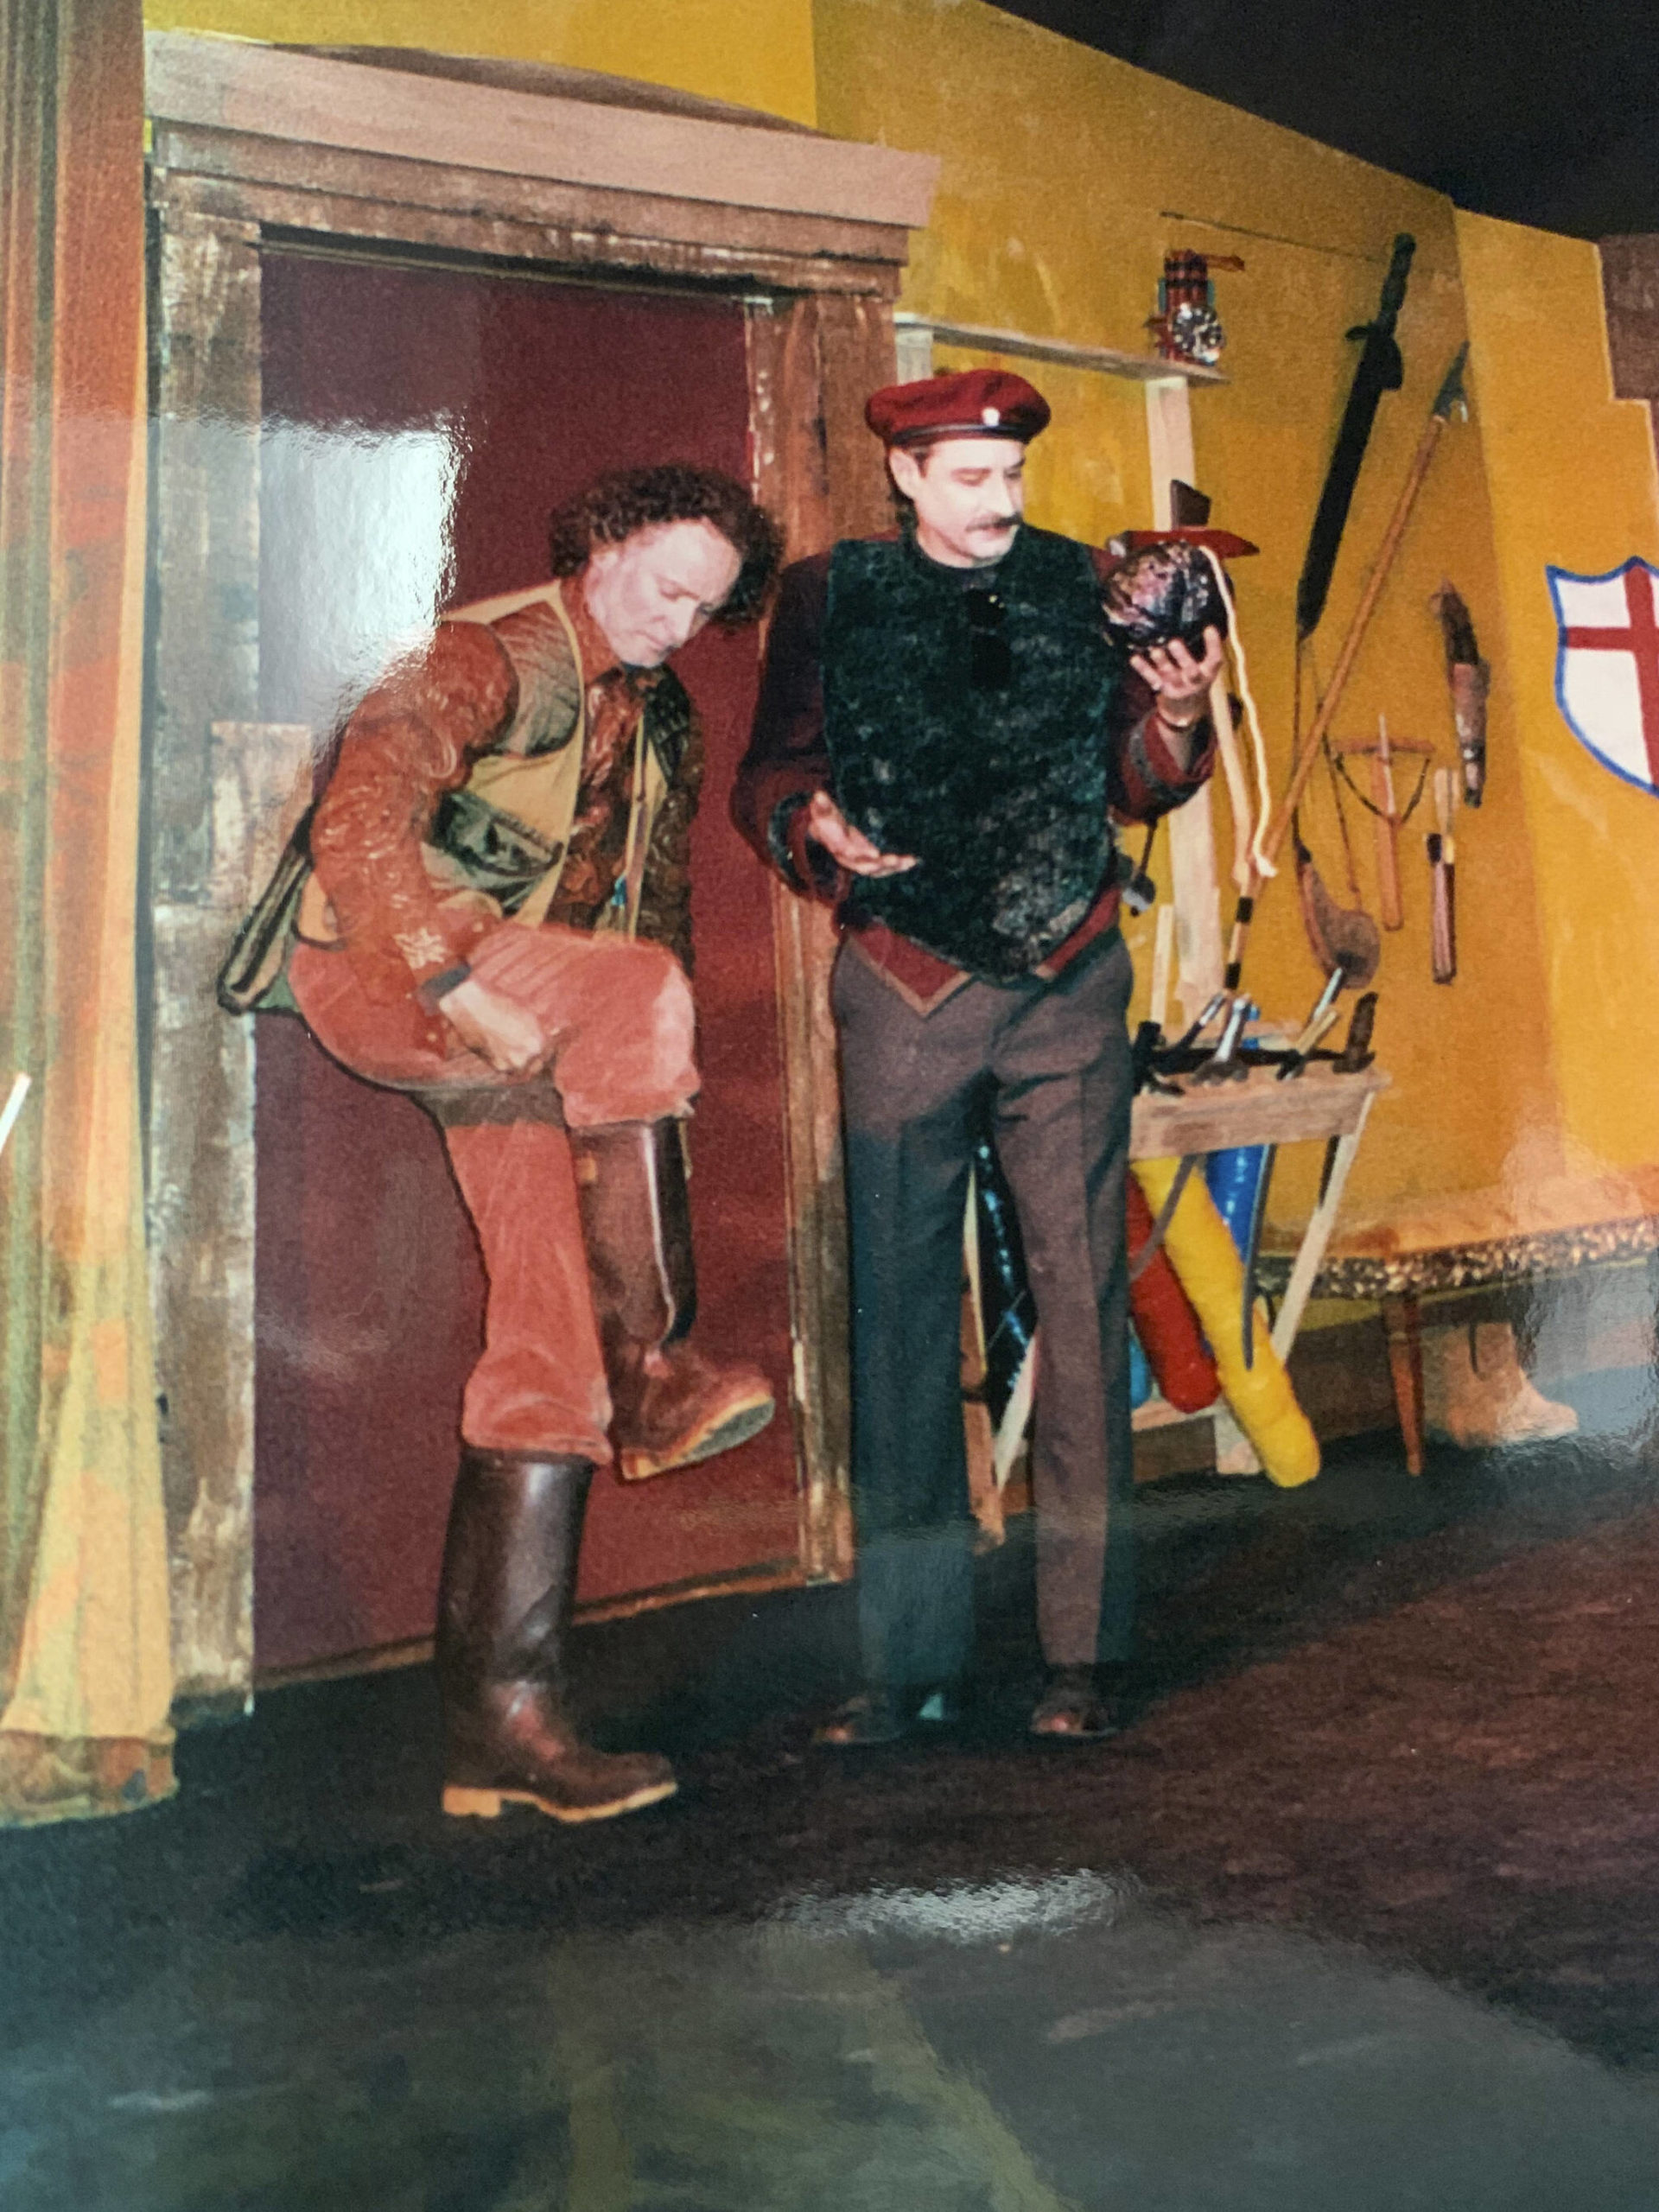 Dick Sanders, left, and Ken Landfield, right, perform a scene from “Tartuffe” at Pier One Theatre in 2000. (Photo provided)